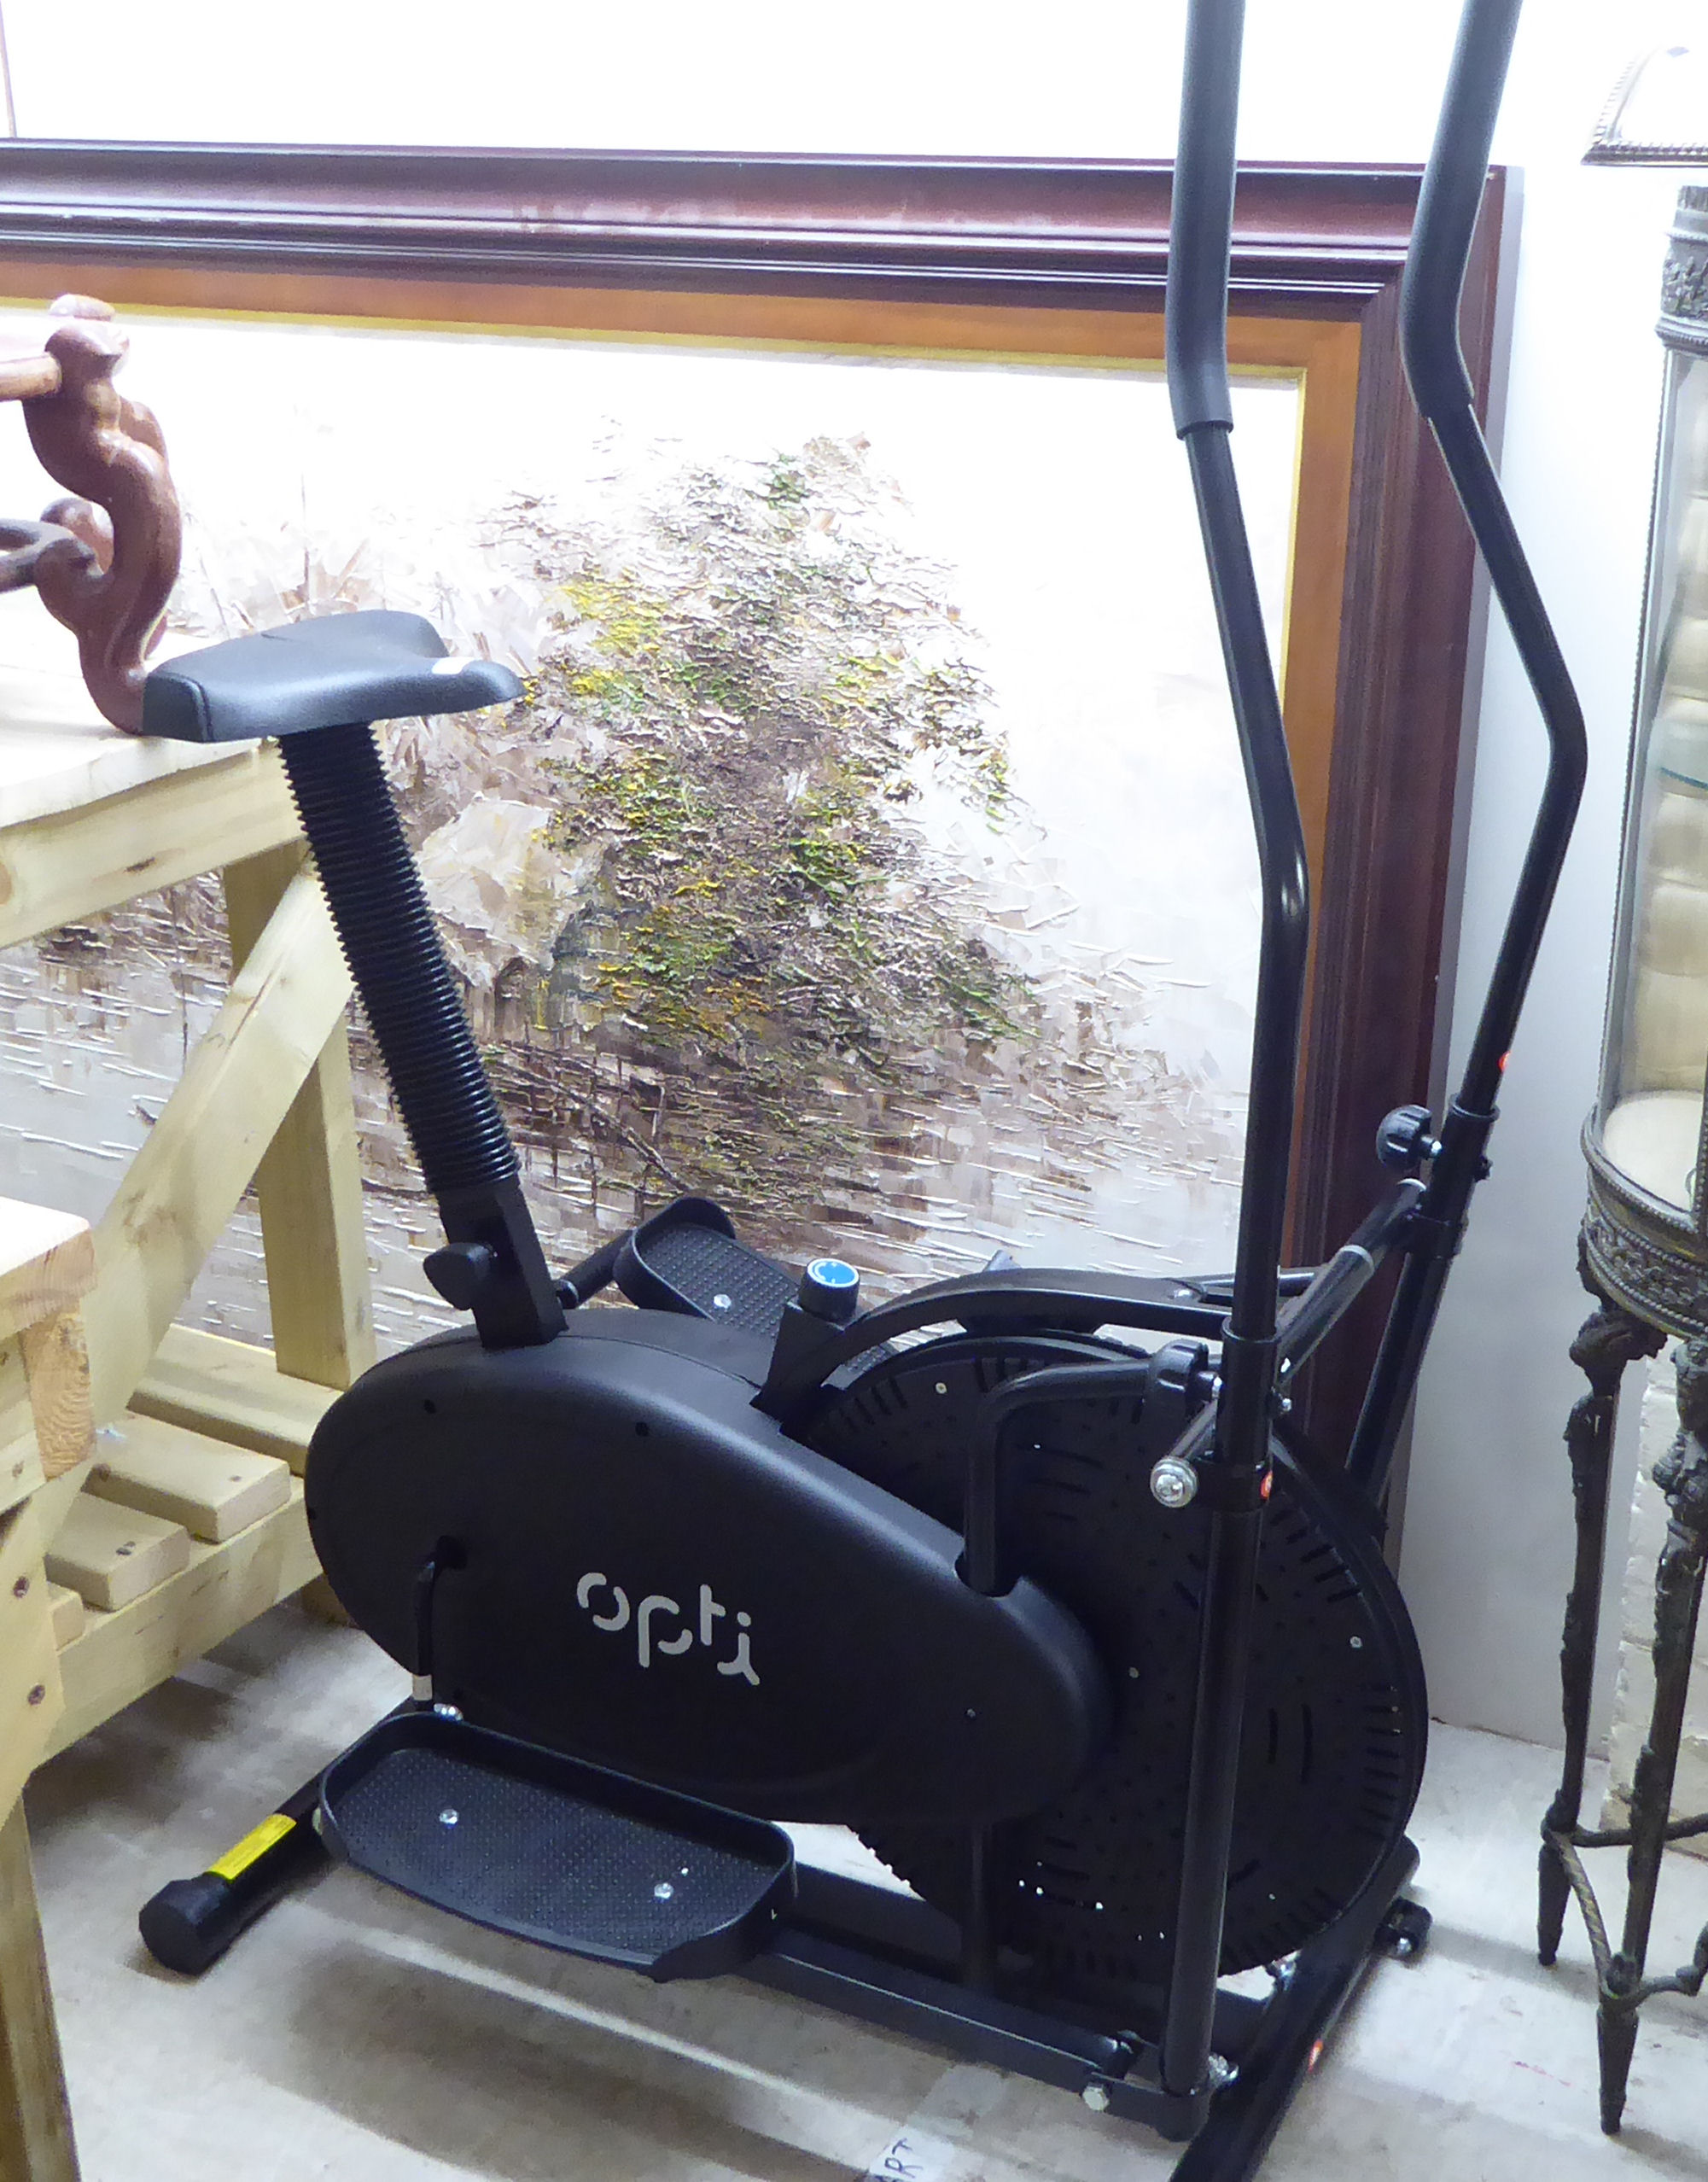 An Opti exercise bike/cross trainer BSR - Image 2 of 2